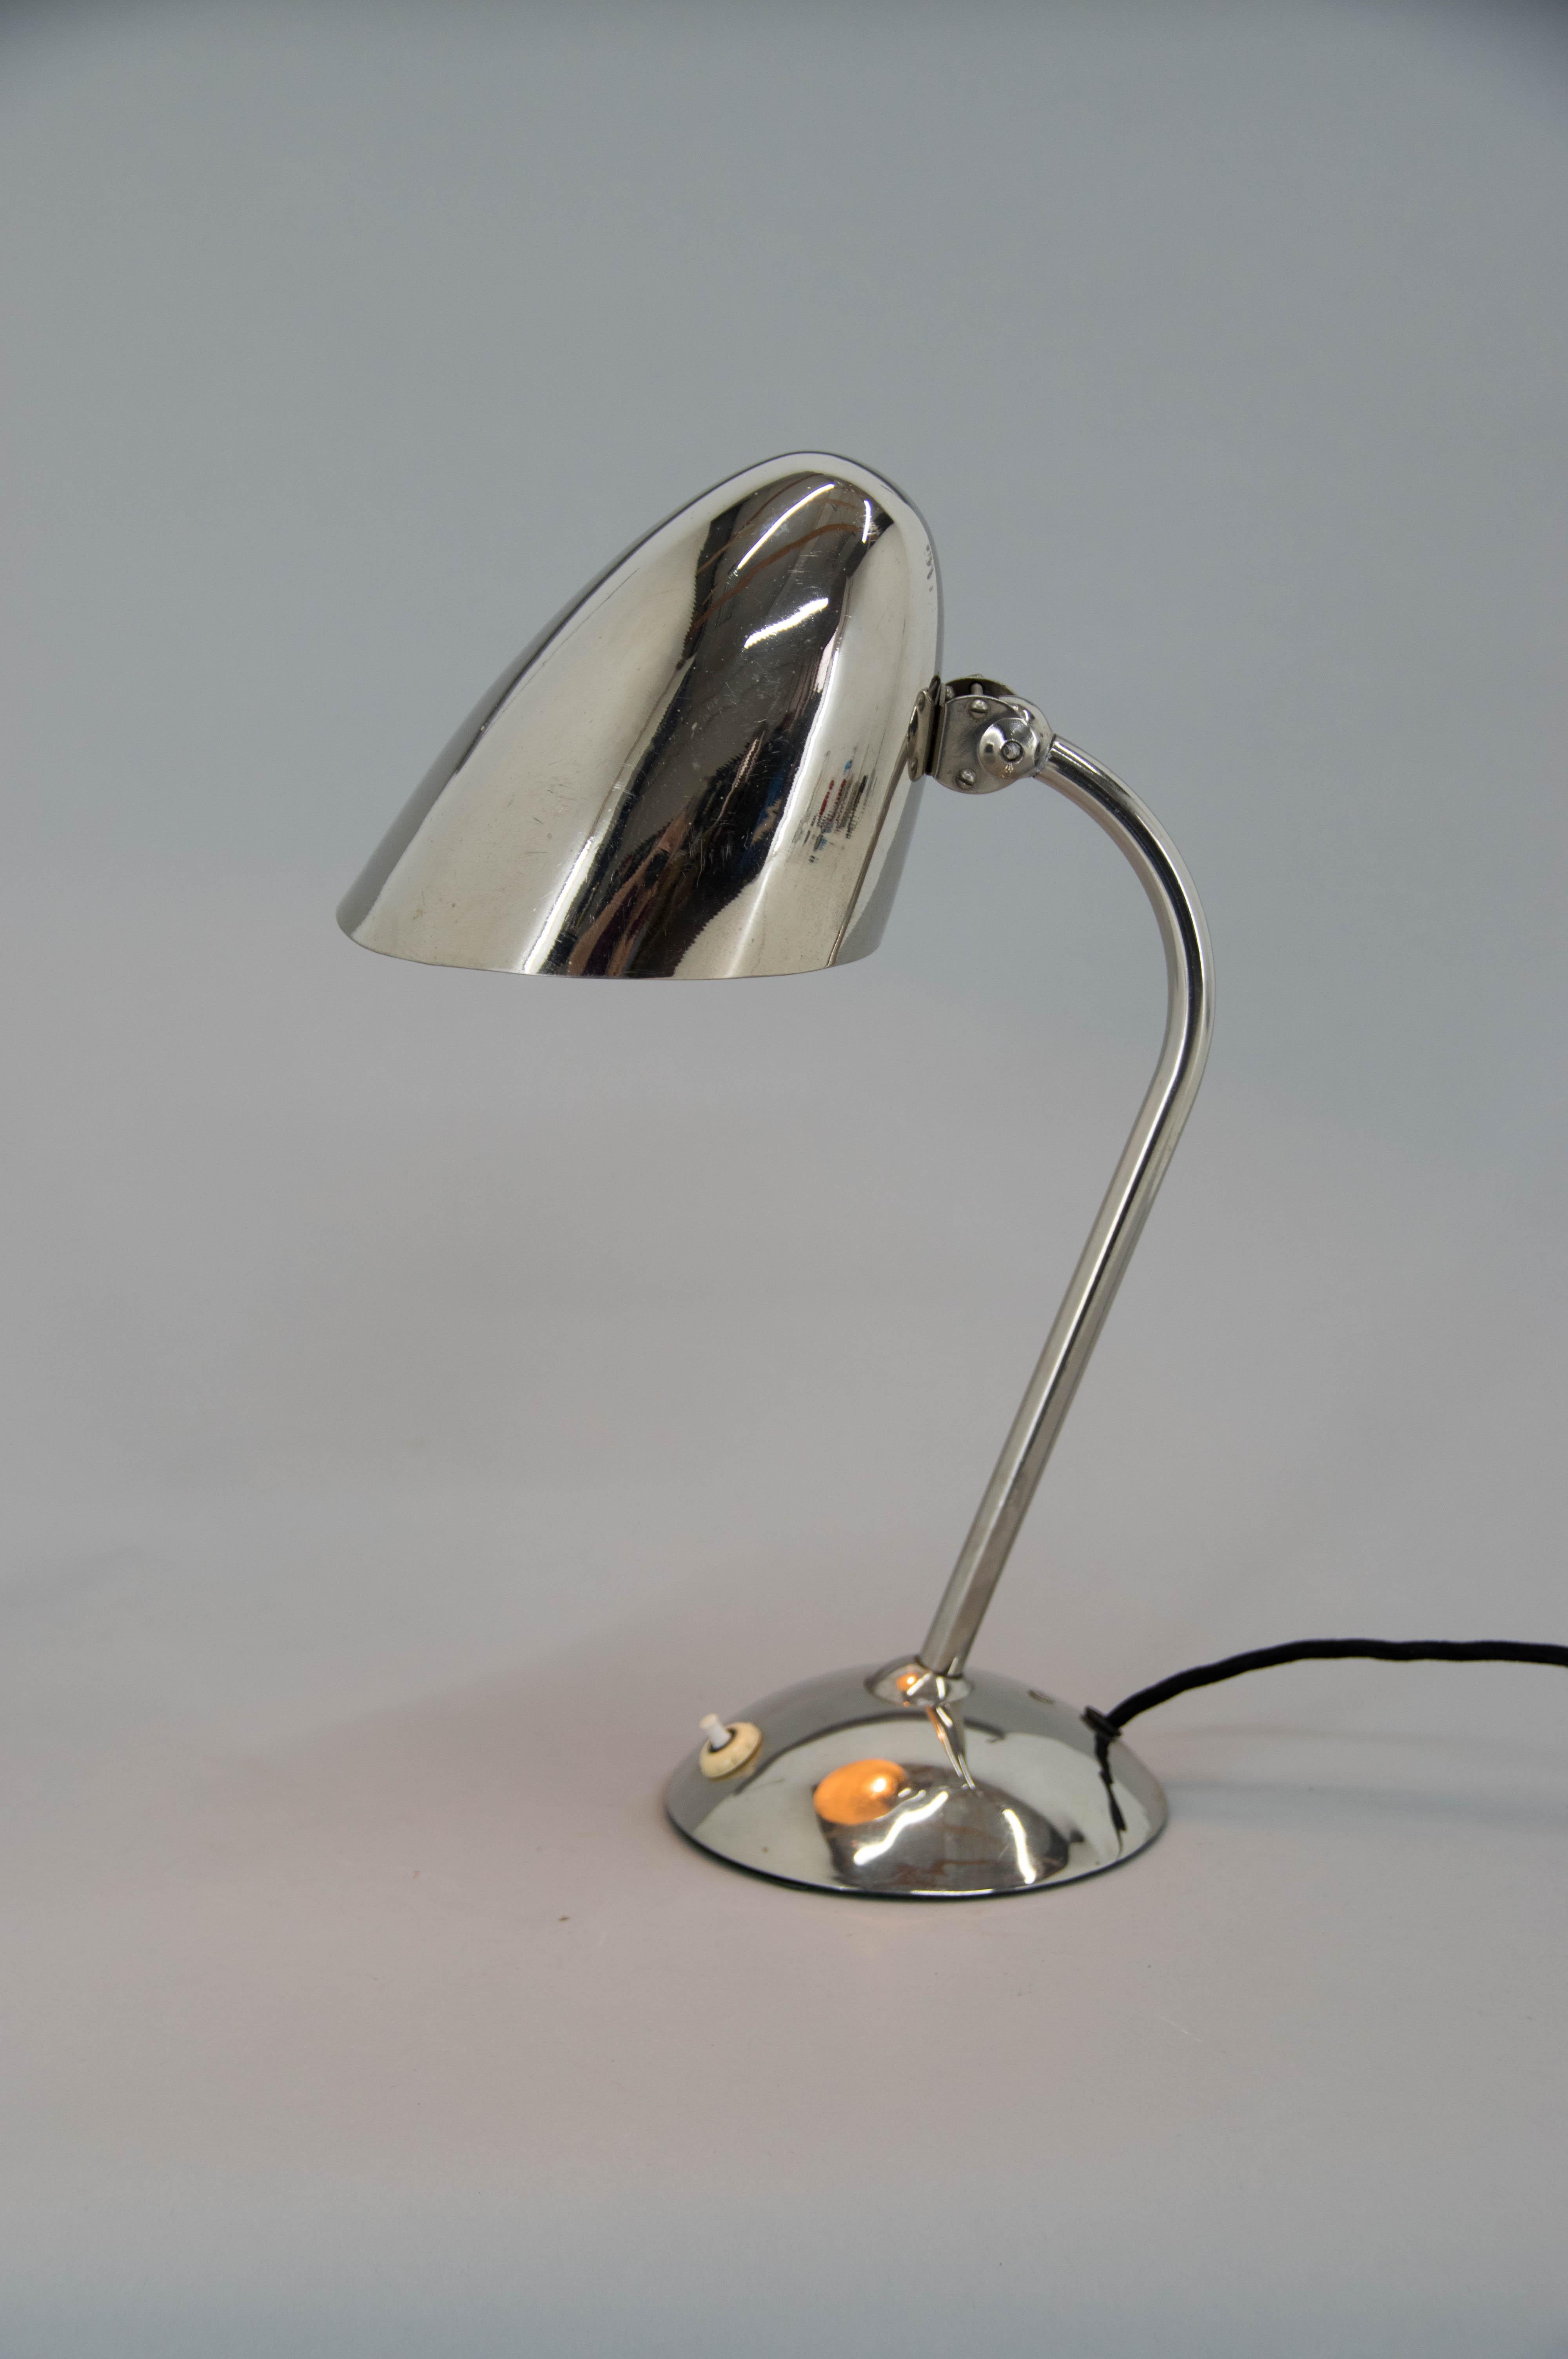 Czech Functionalist / Bauhaus Flexible Table Lamp by Franta Anyz, 1930s For Sale